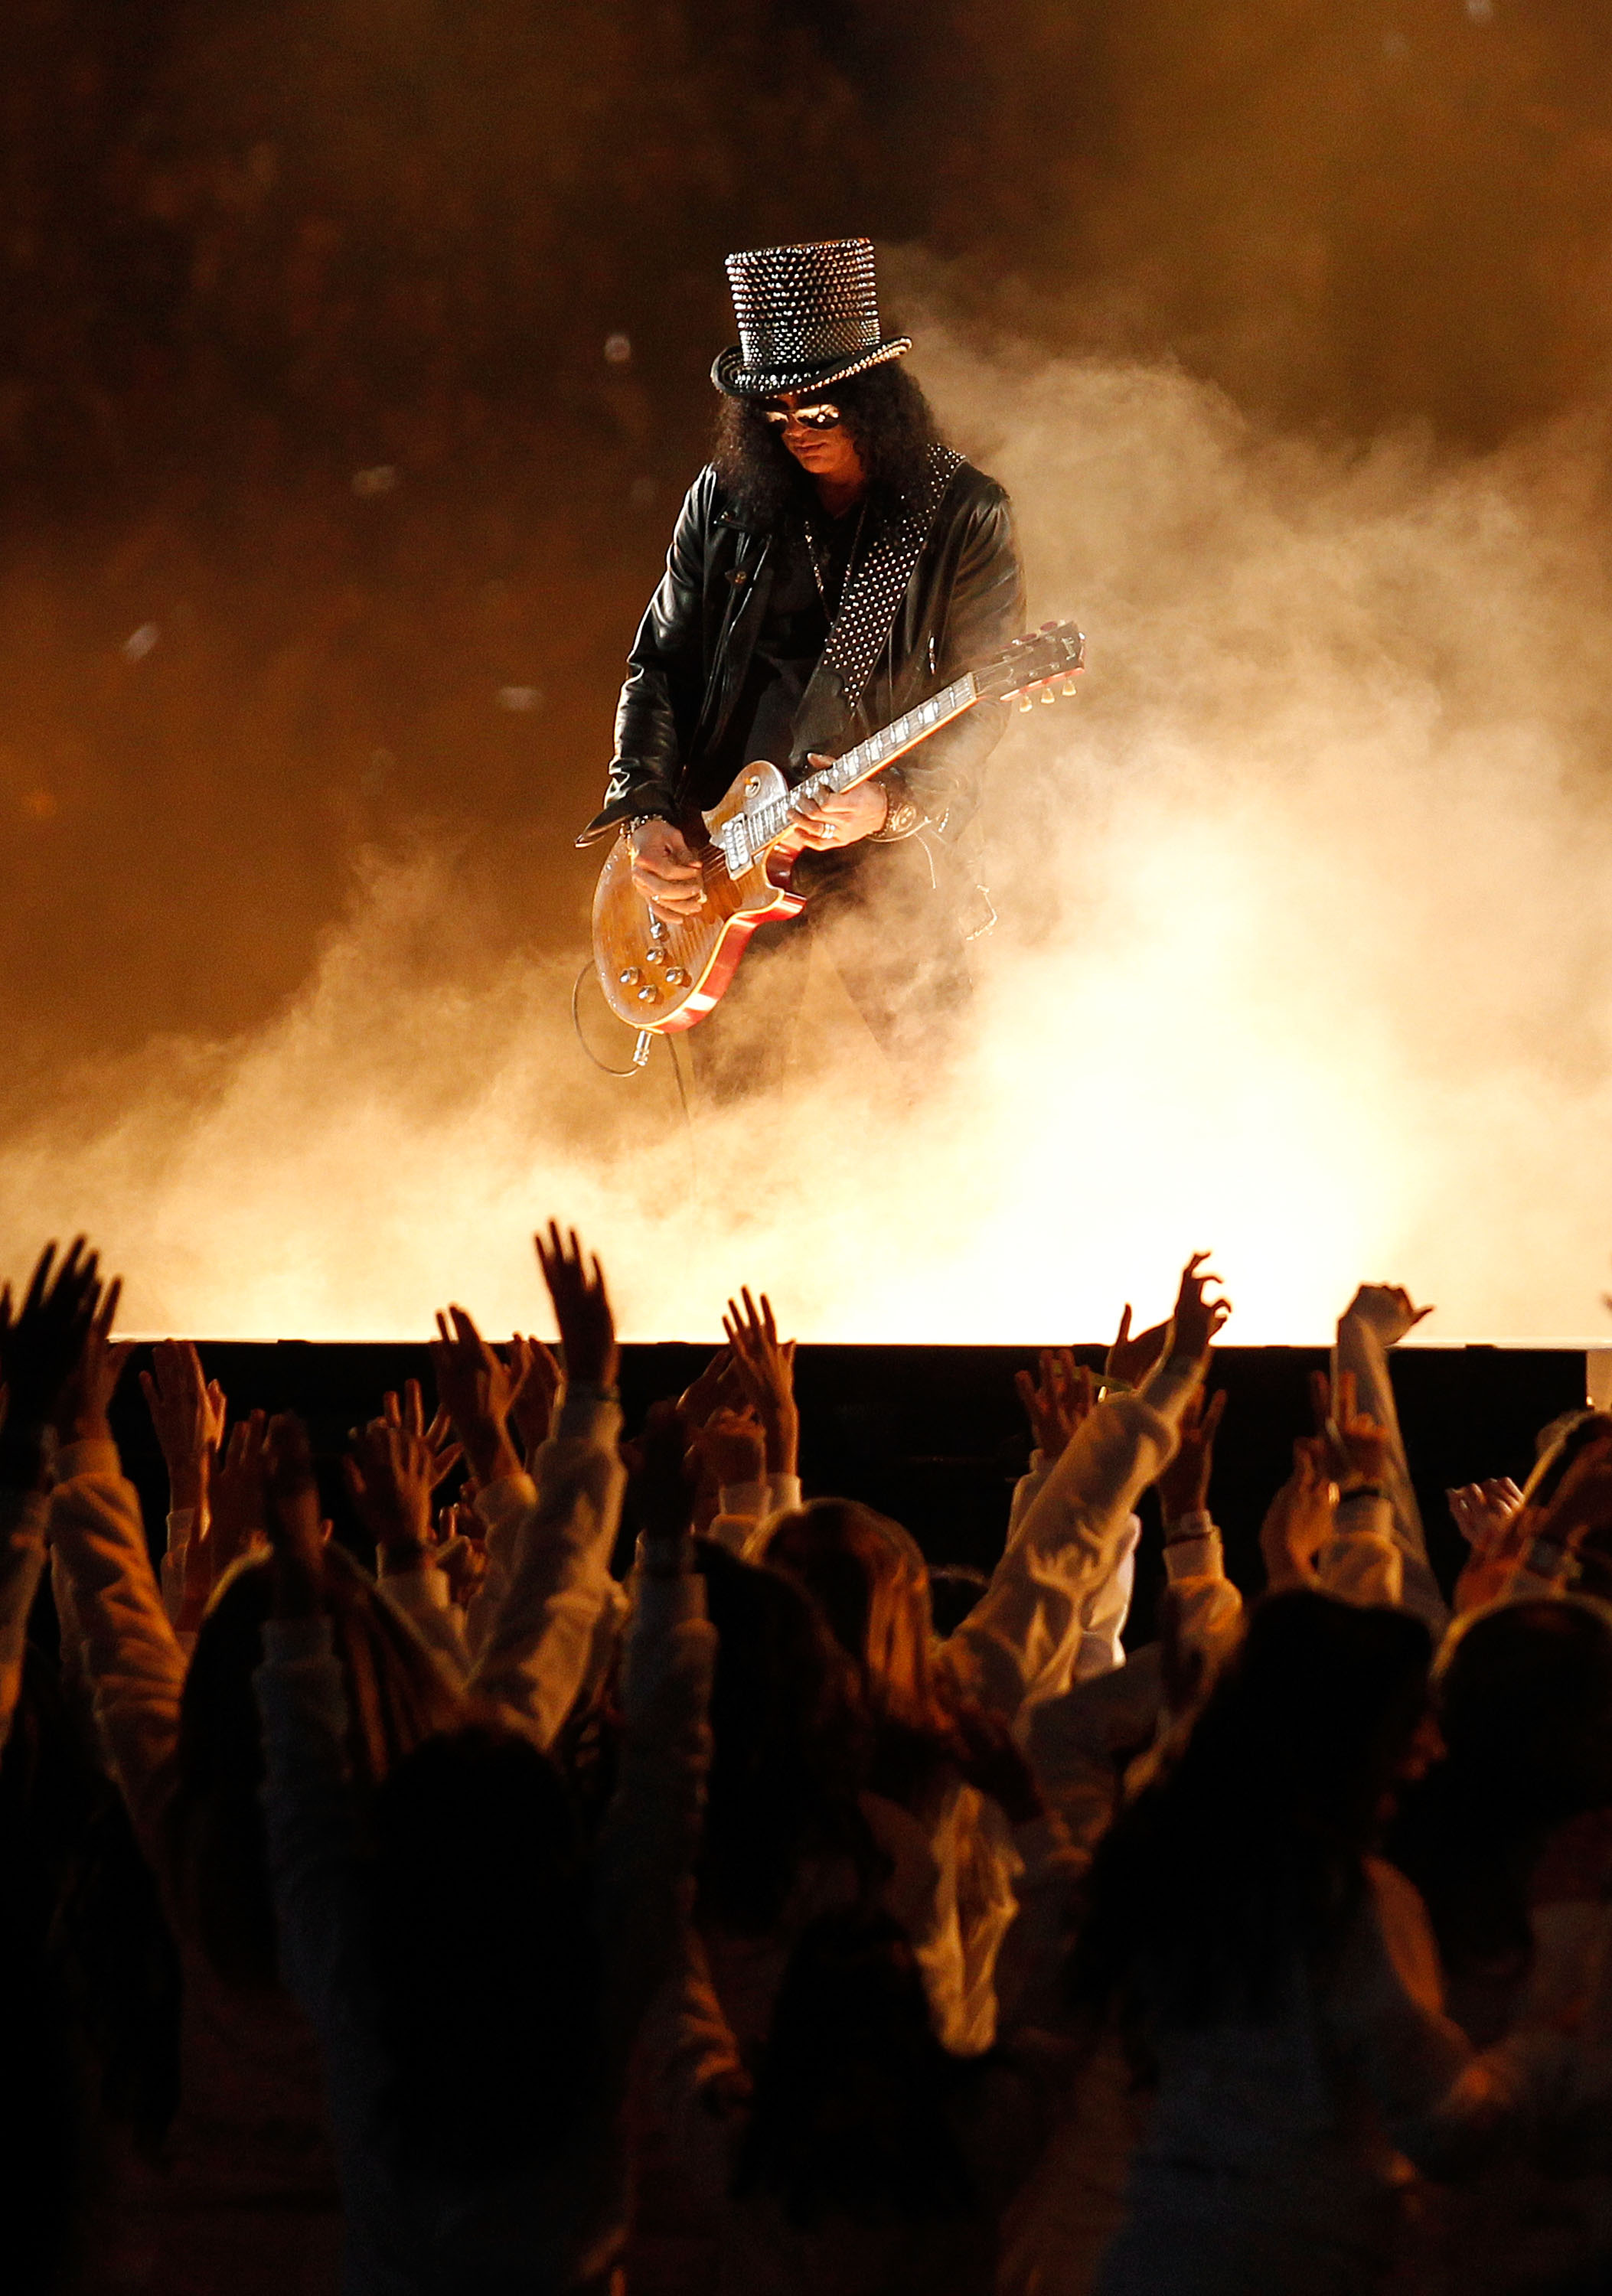 NFL - The Black Eyed Peas' Fergie performs with Slash during halftime of Super  Bowl XLV at Cowboys Stadium in Arlington, Texas on February 6, 2011. (Gary  A. Vasquez/NFL)